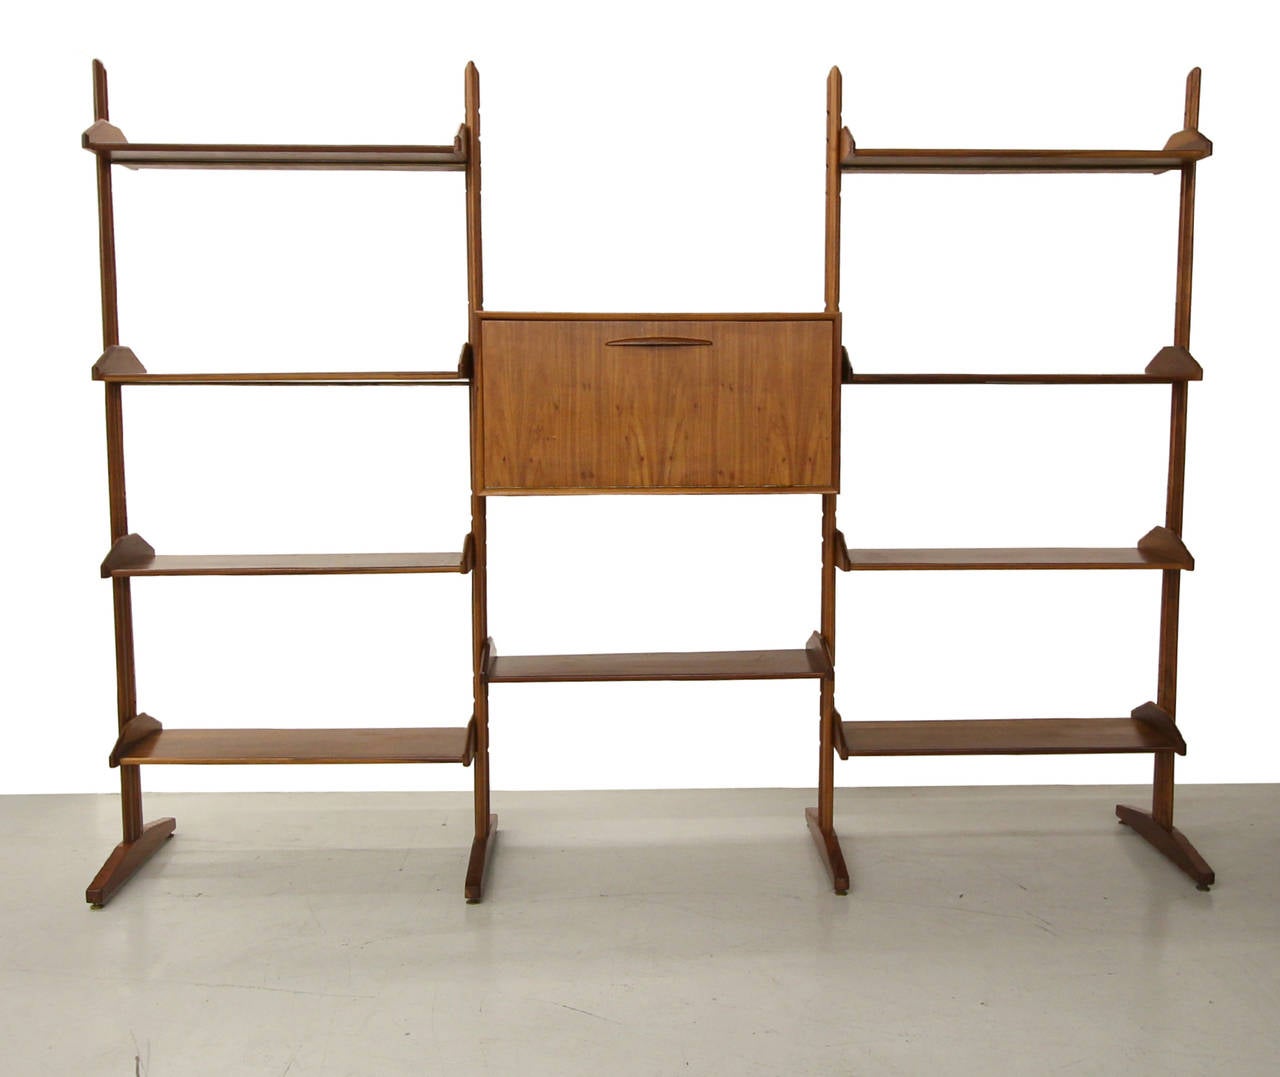 This is the most amazing solid walnut room divider shelving unit. The unit features ten solid walnut shelves (1 not pictured), one box unit and four standing supports. Under every shelf and box is a brass rod and the adjustable feet are also brass.